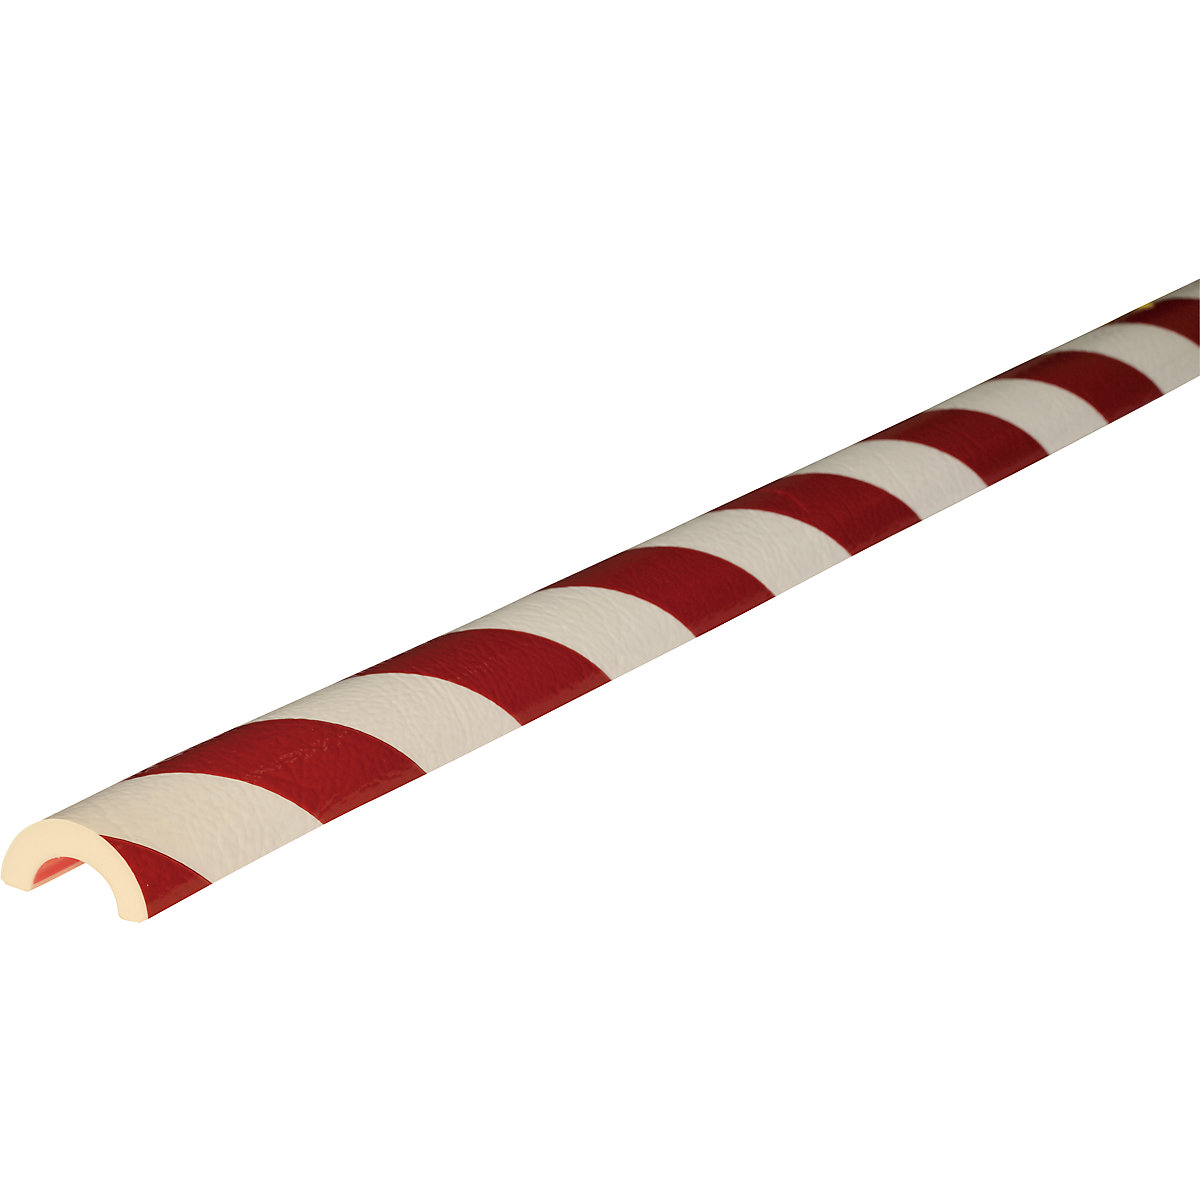 Knuffi® pipe protection – SHG, type R30, 1 m length, red / white-9